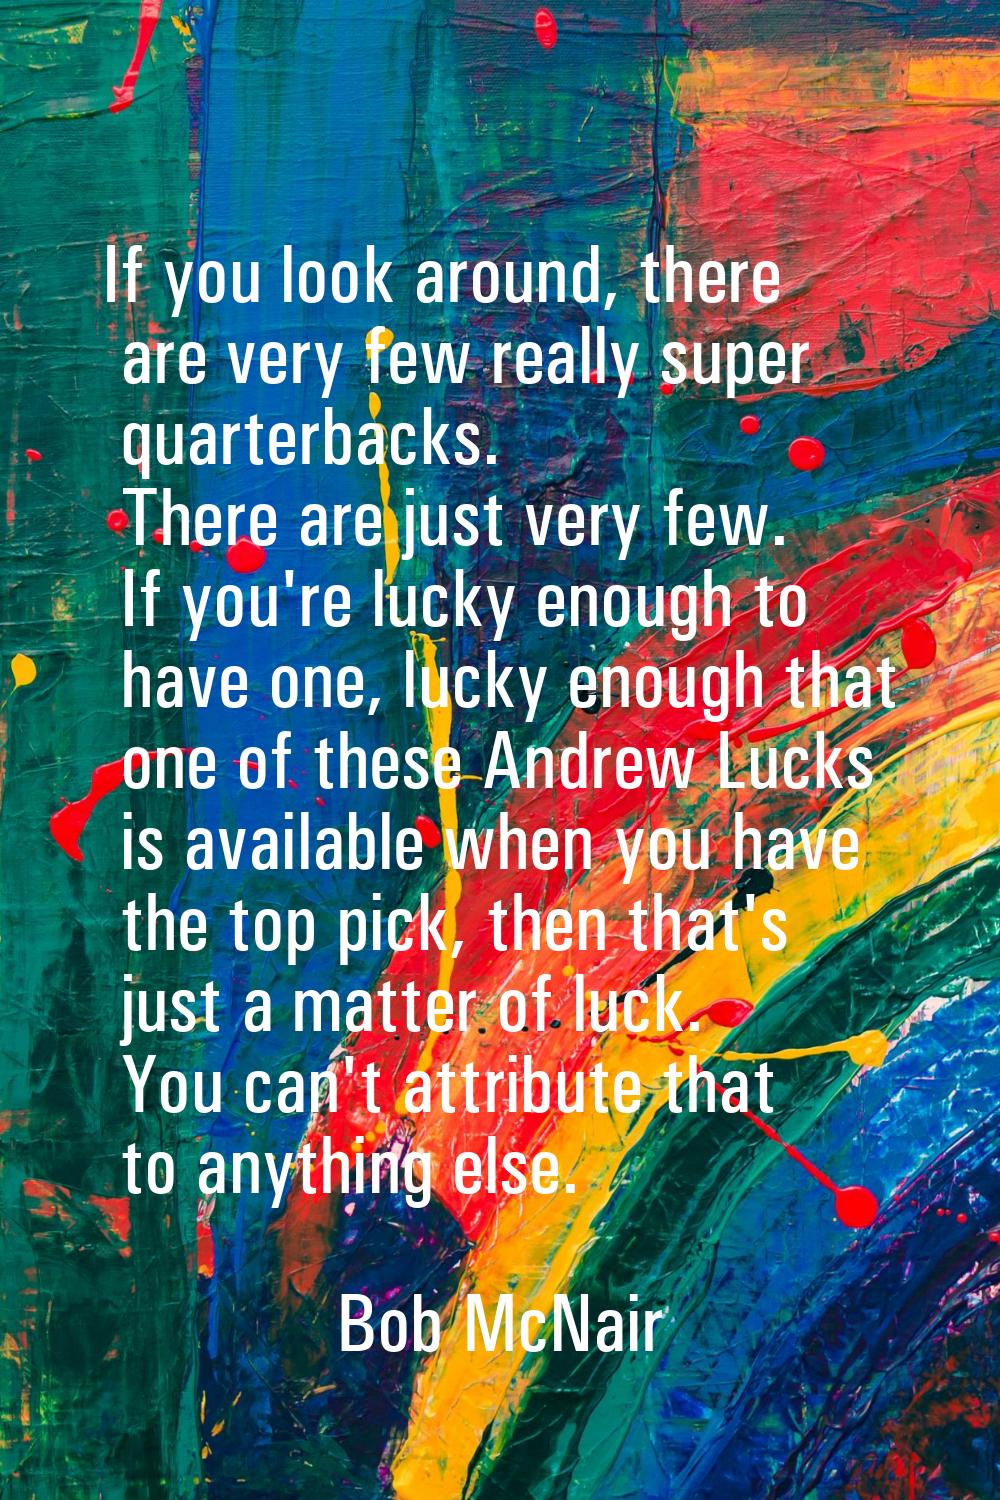 If you look around, there are very few really super quarterbacks. There are just very few. If you'r